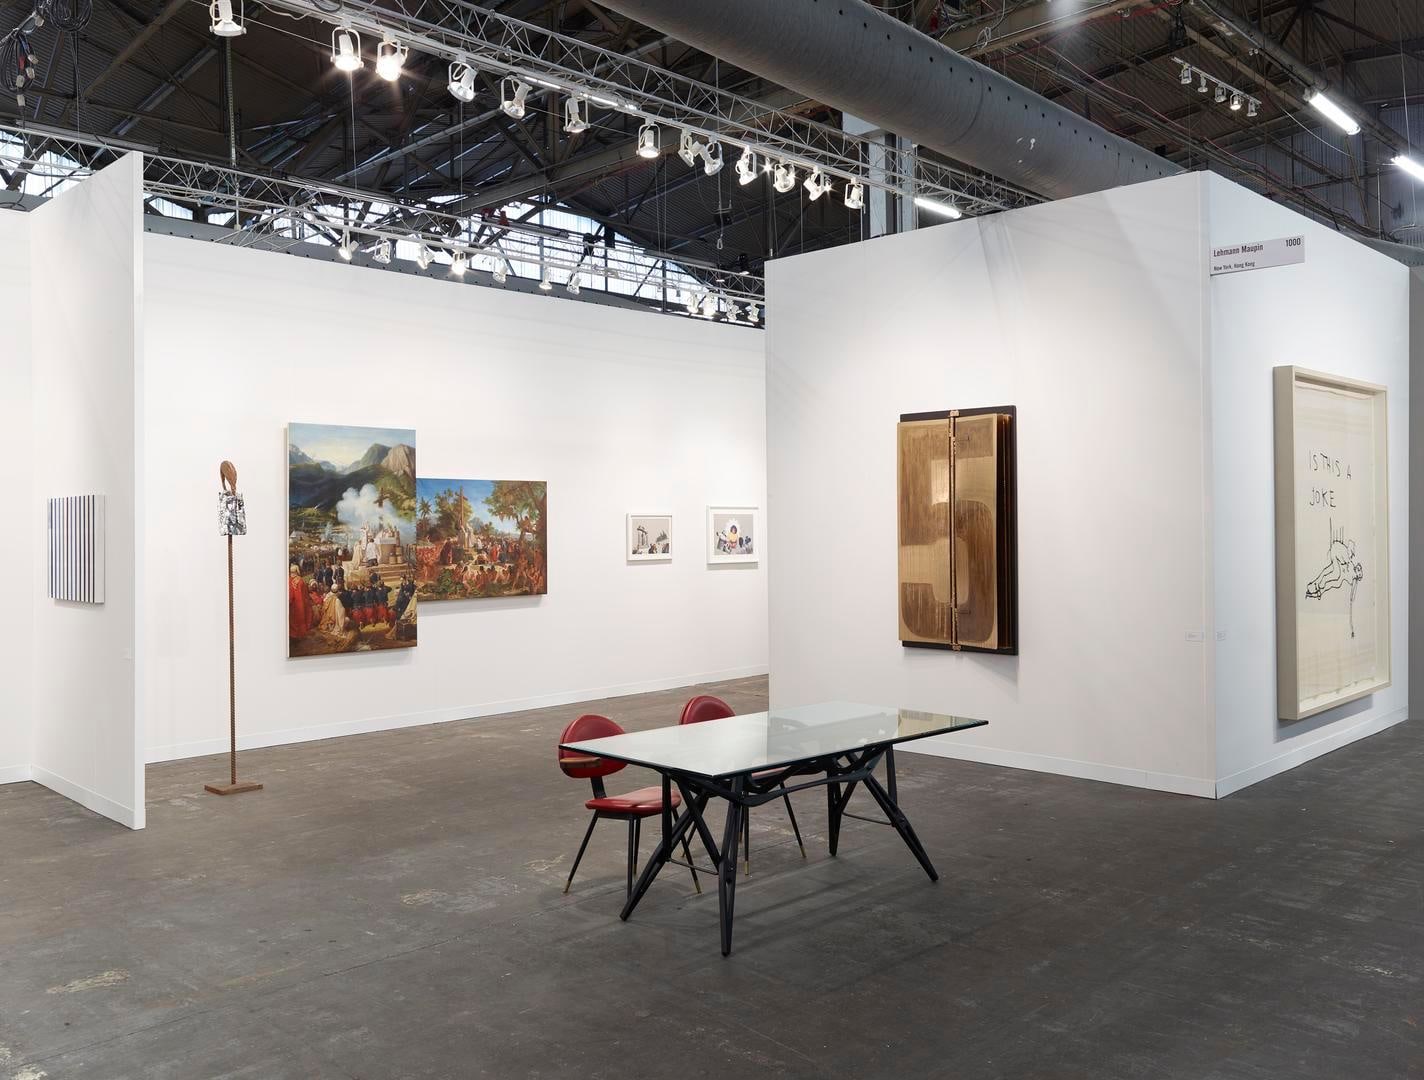  Installation view, Booth 1000, The Armory Show 2015